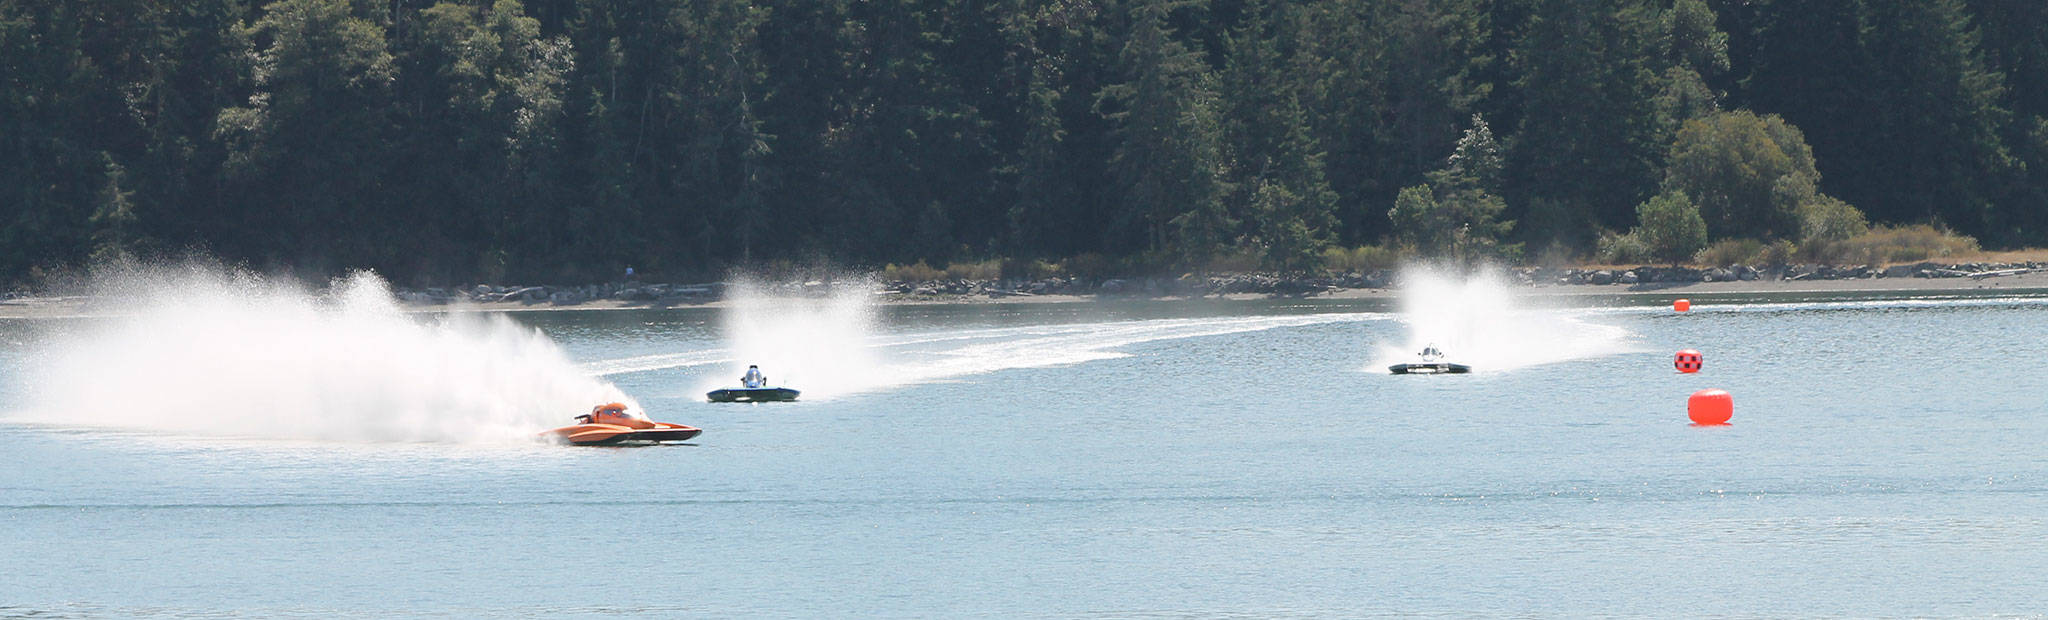 Hydros head into the turn during one of Sunday’s heats. (Photo by Jim Waller/Whidbey News-Times)